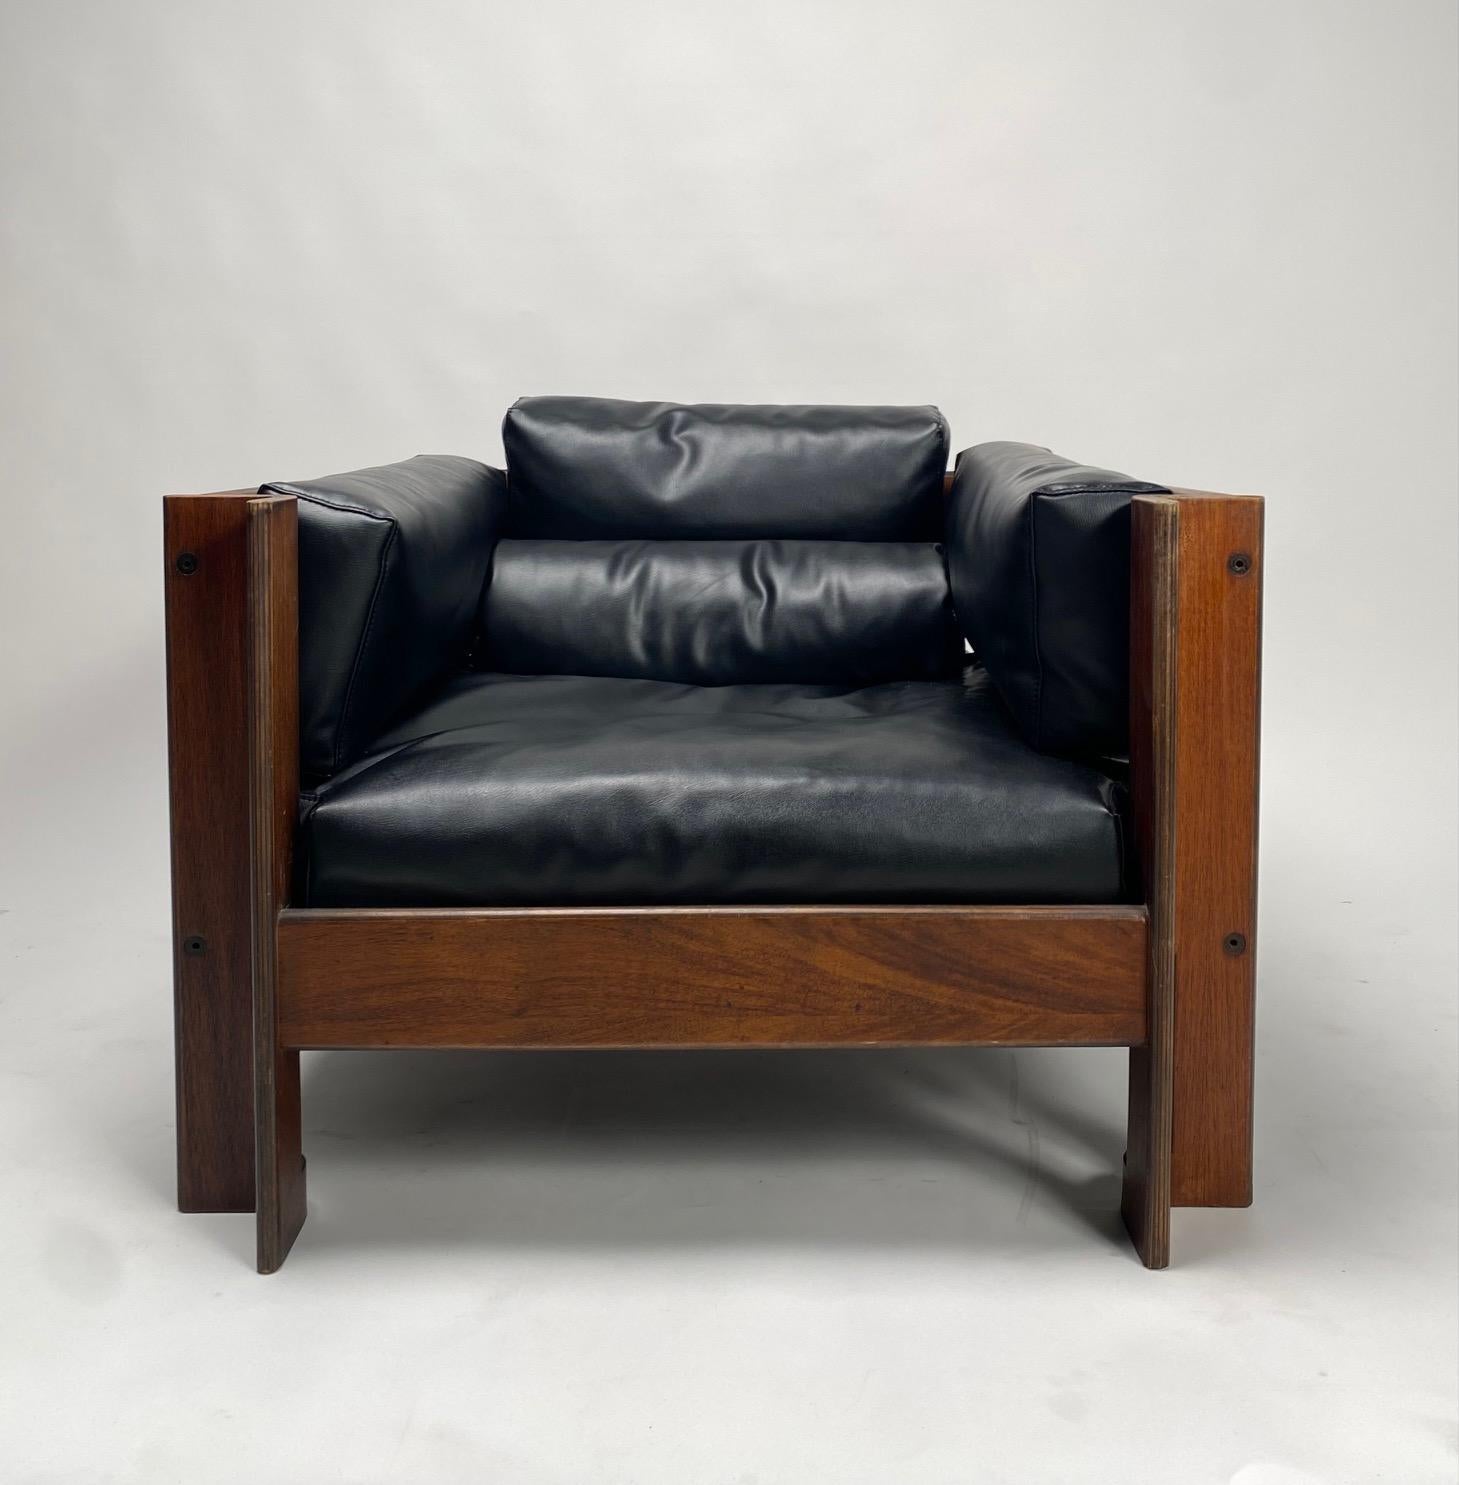 'Zelda' Armchair by Sergio Asti for Poltrona, Italy, 1962 For Sale 4